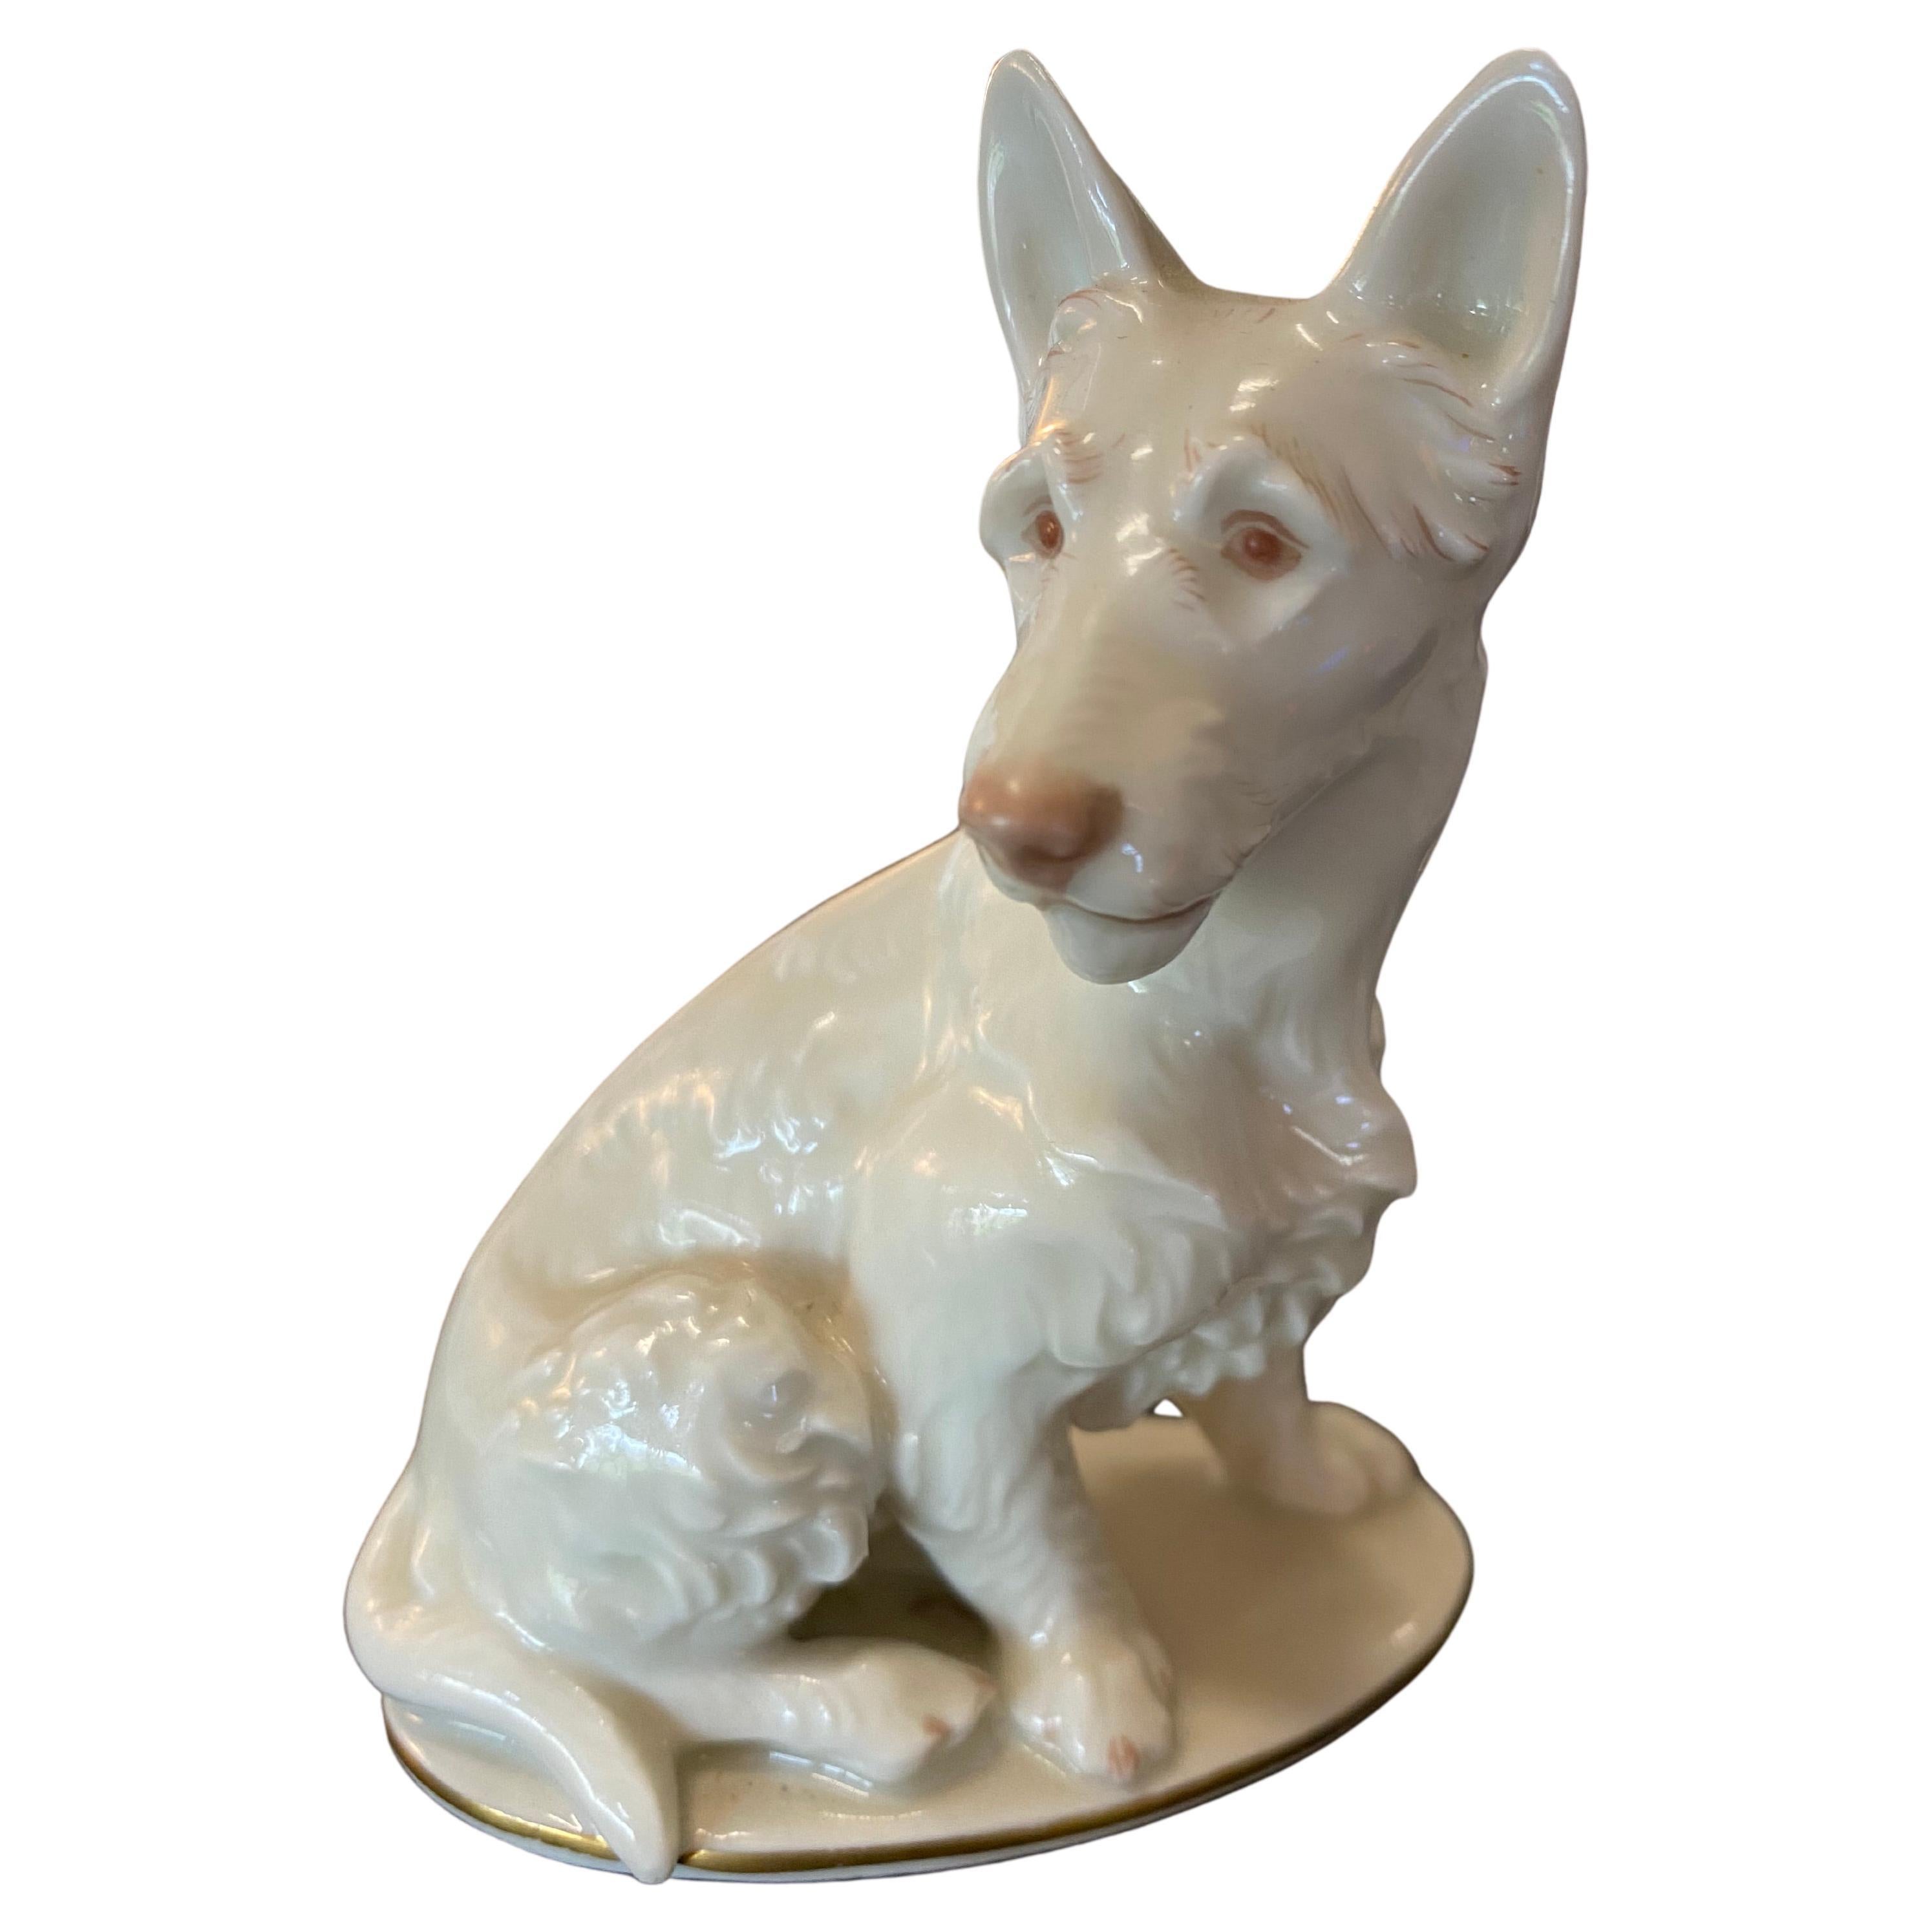 Scotch Terrier Made of Porcelain by Rosenthal